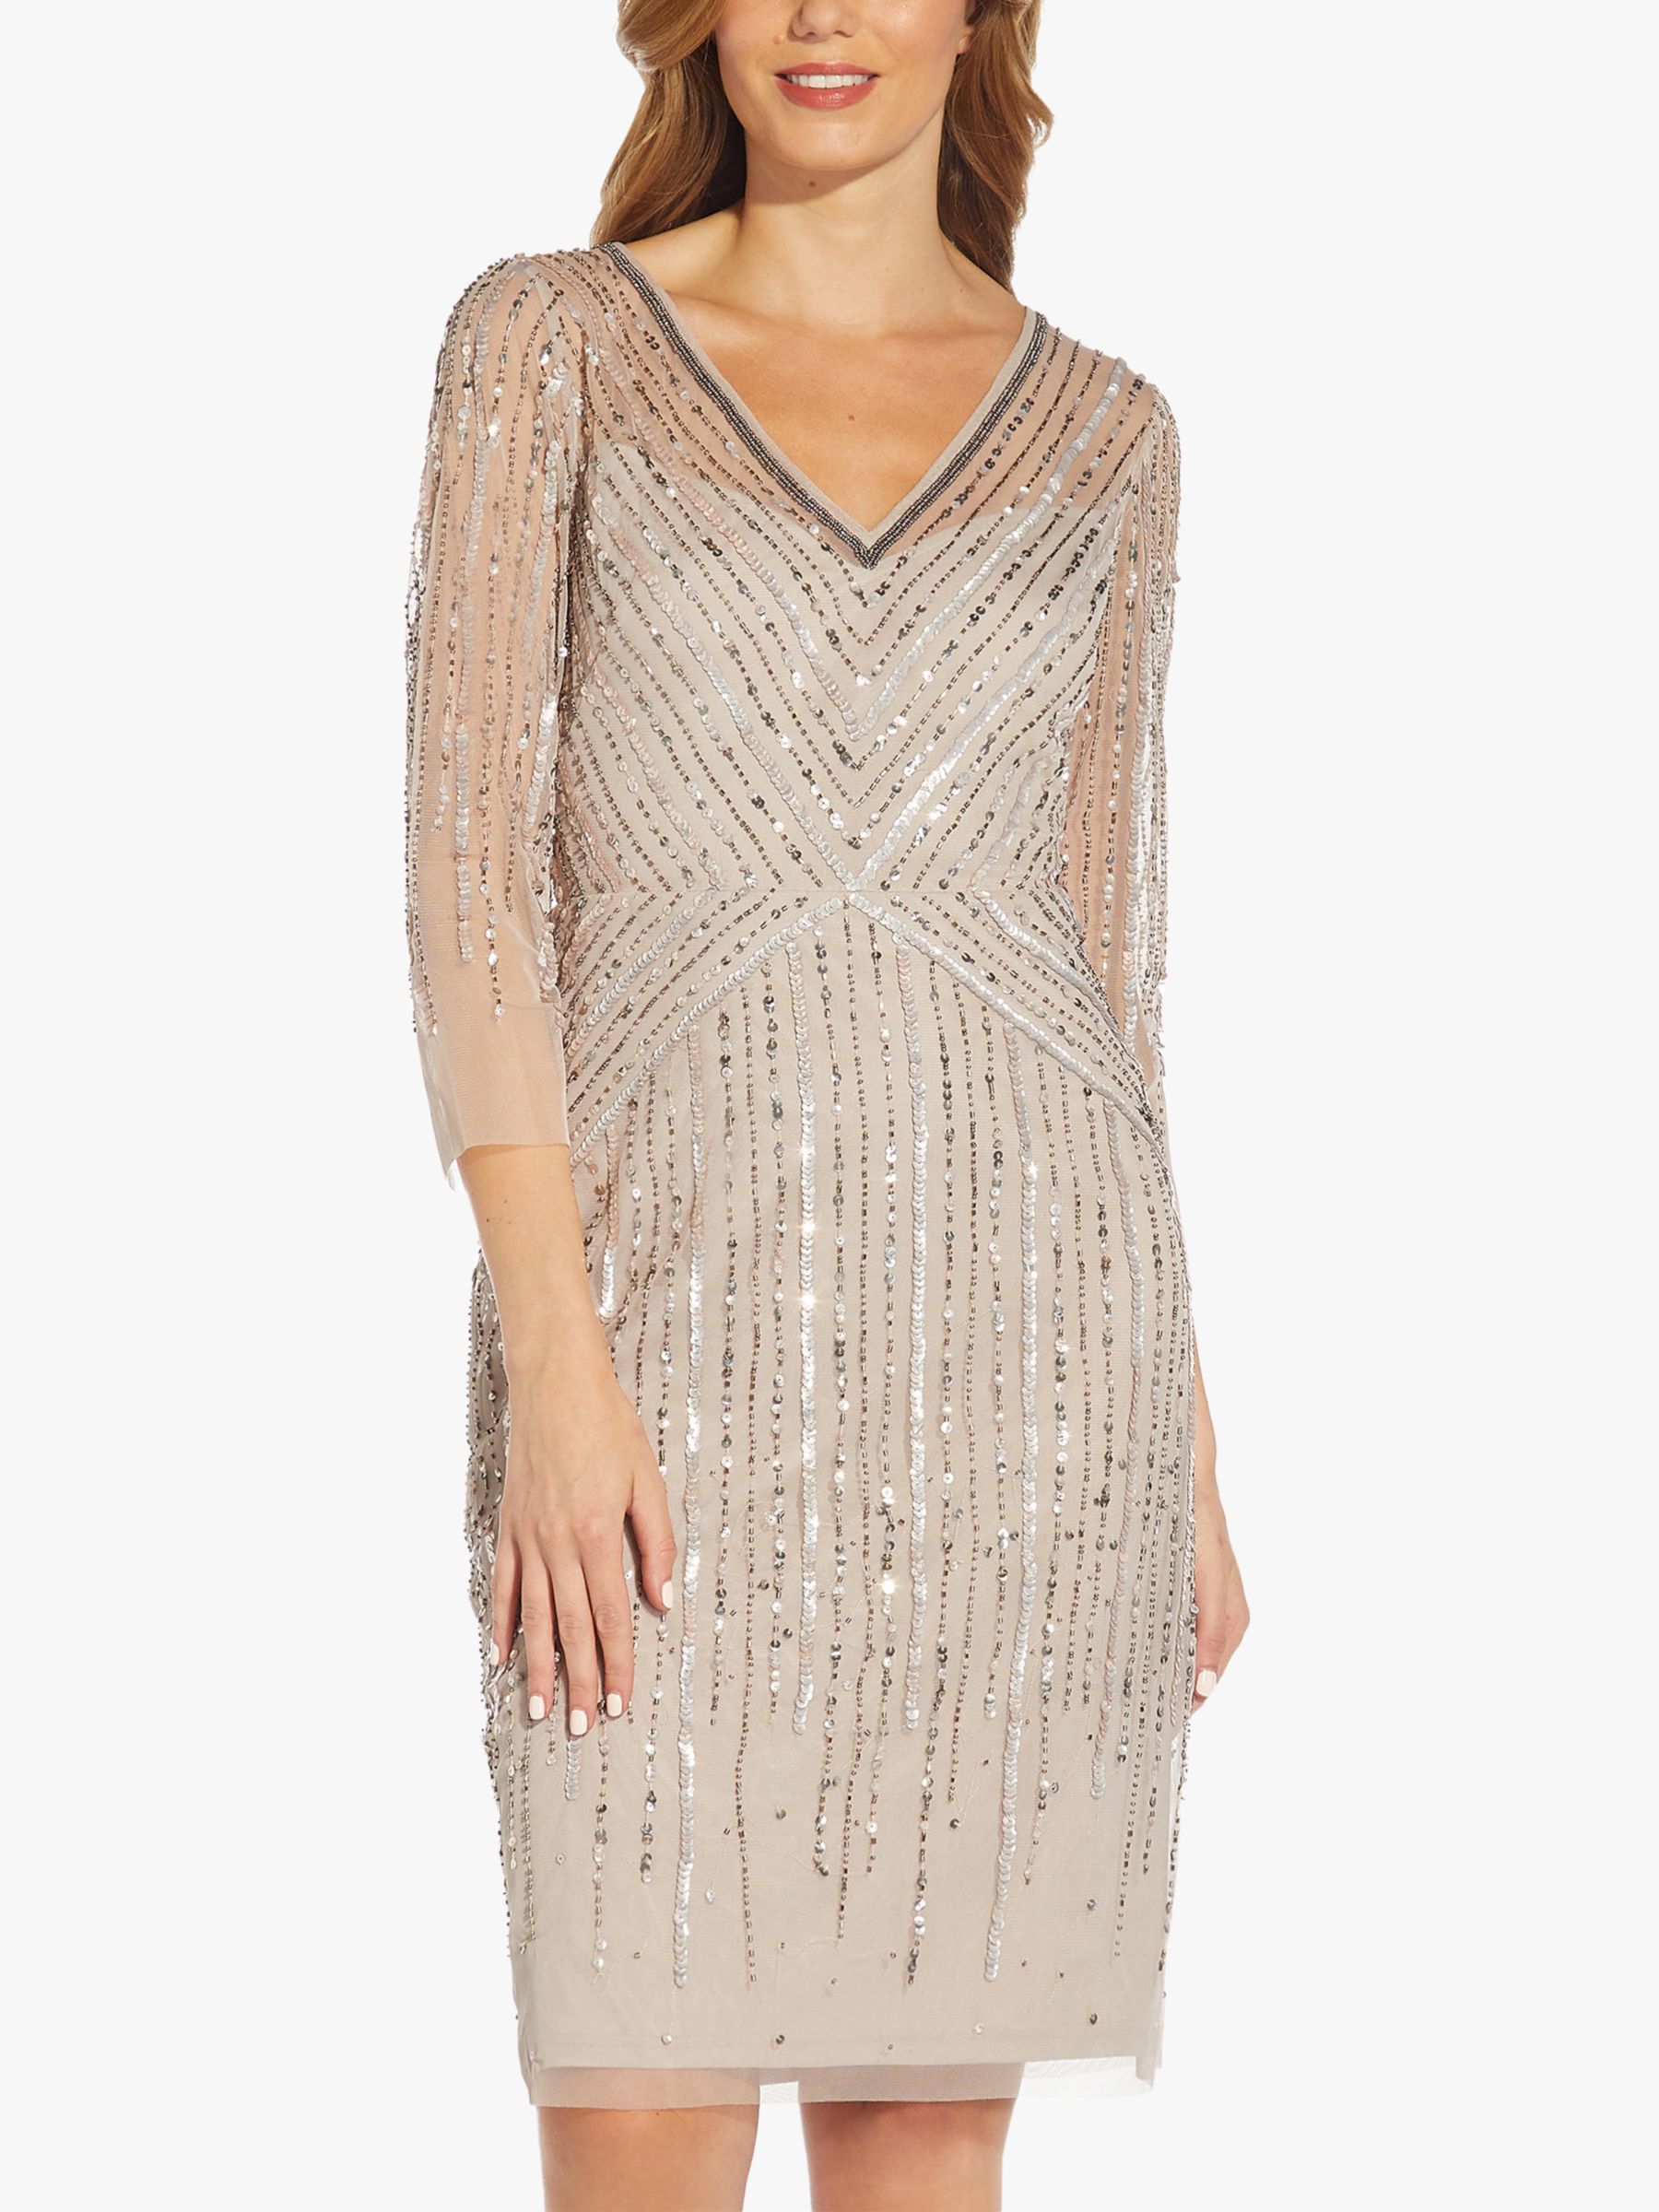 Adrianna Papell Beaded Cocktail Dress ...